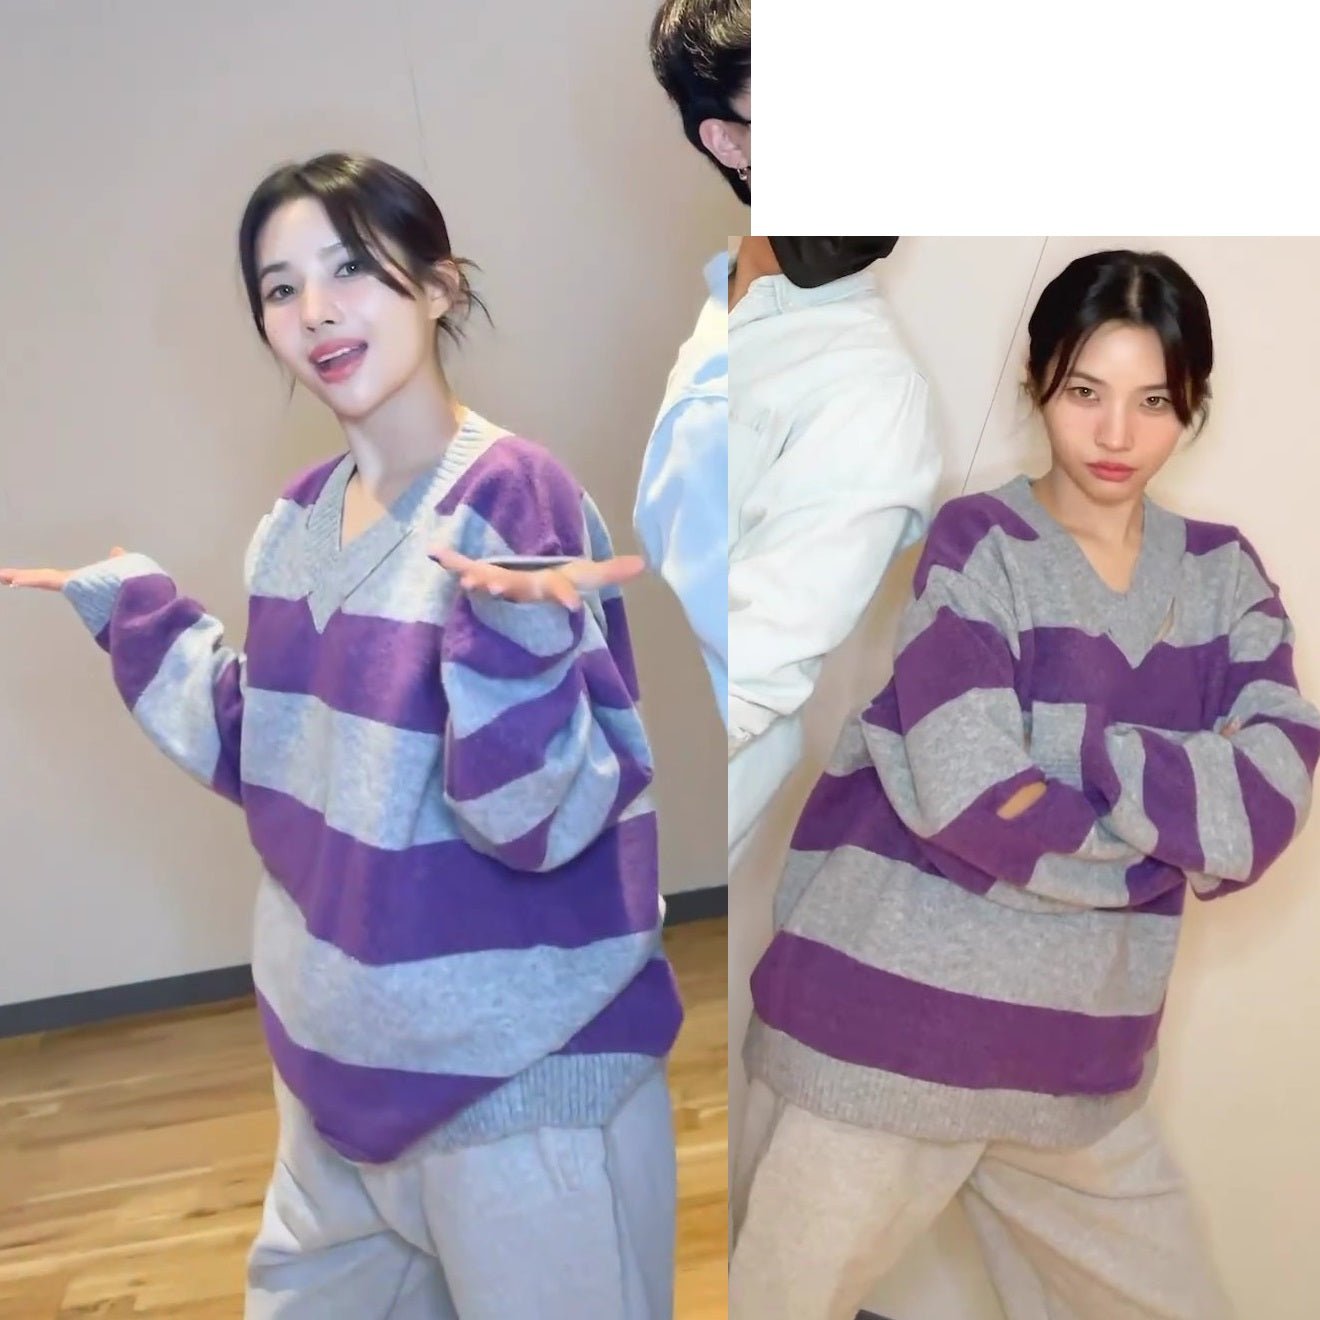 [HOODHOOD] [(G)I-DLE So-yeon 着用] Stripe cut-out V neck knit PURPLE - コクモト KOCUMOTO